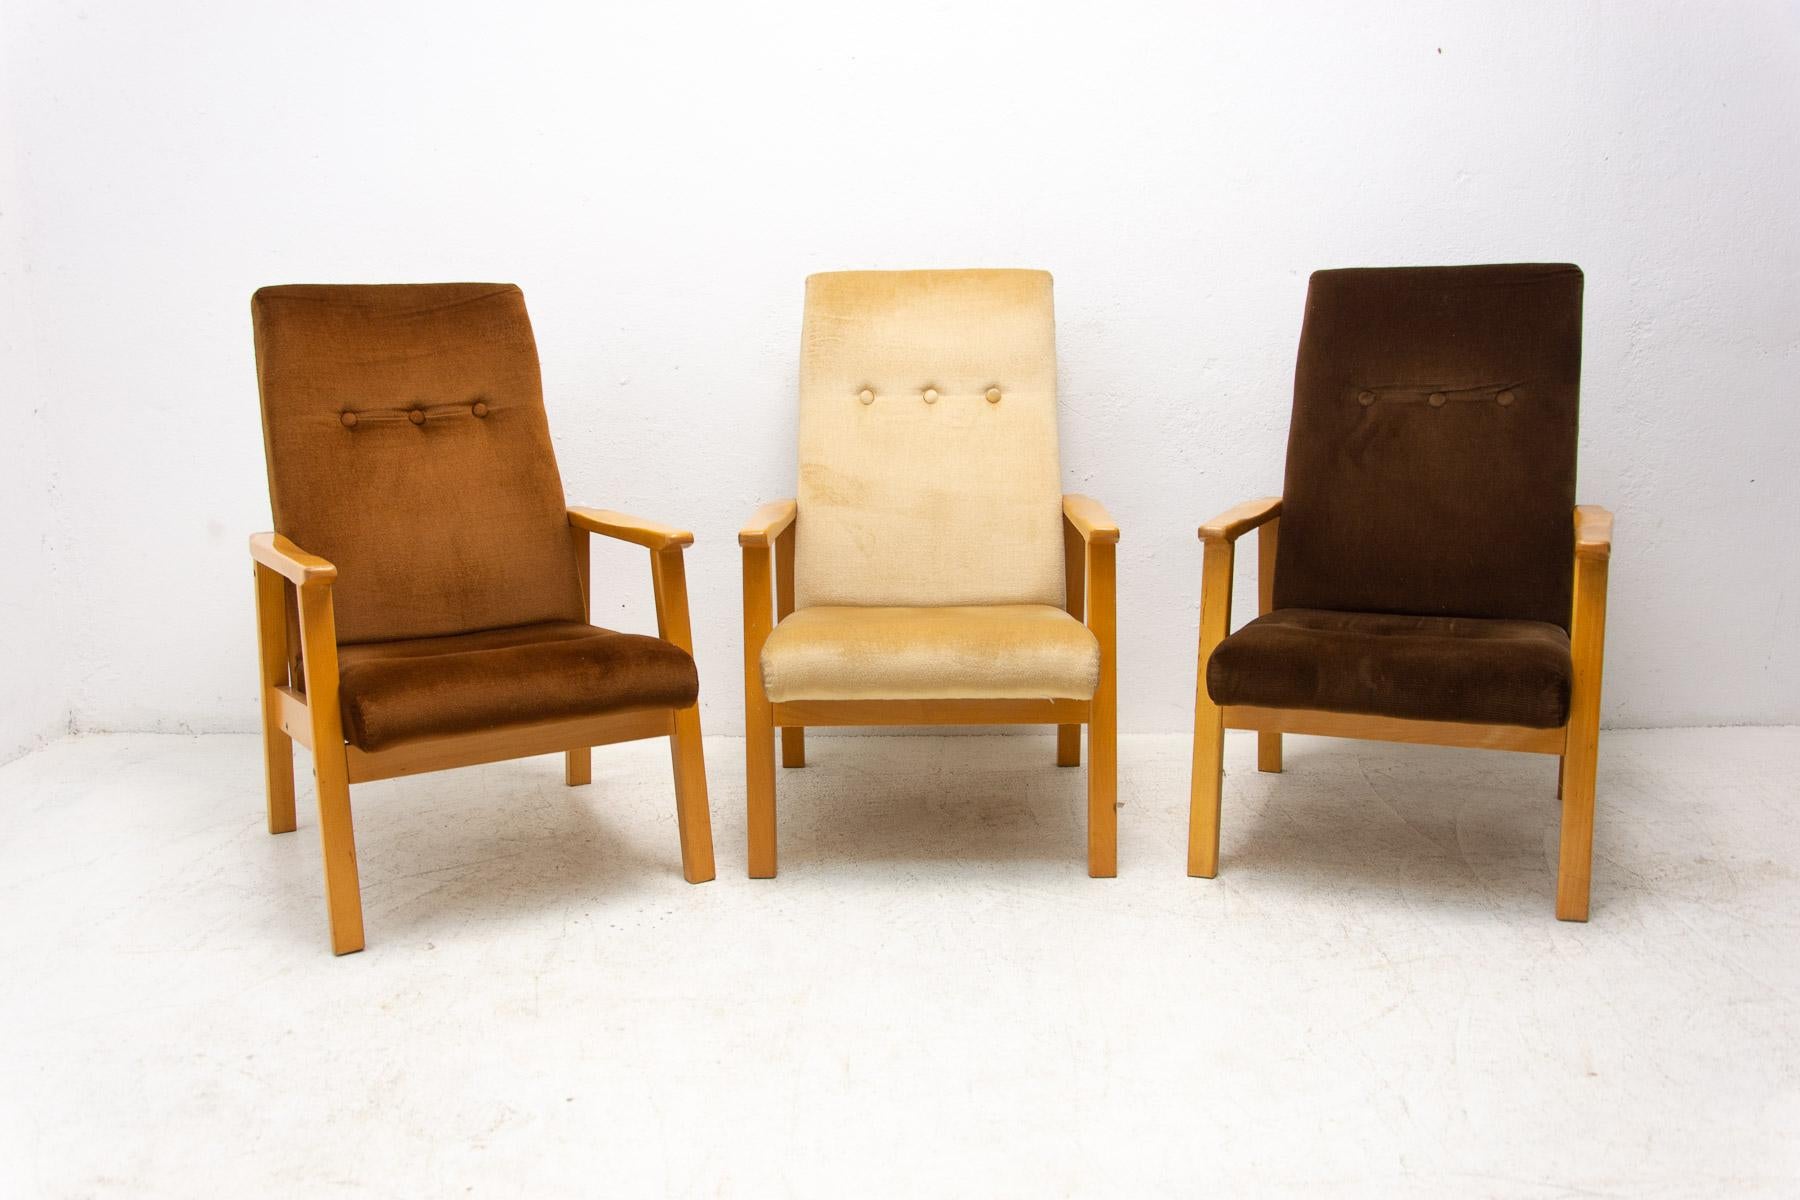 These scandinavian style armchairs were made in the former Czechoslovakia in the 1980´s.

The structure is made of beech wood, the chairs have an original upholstery. Generally in very good vintage condition. Price is for the set of